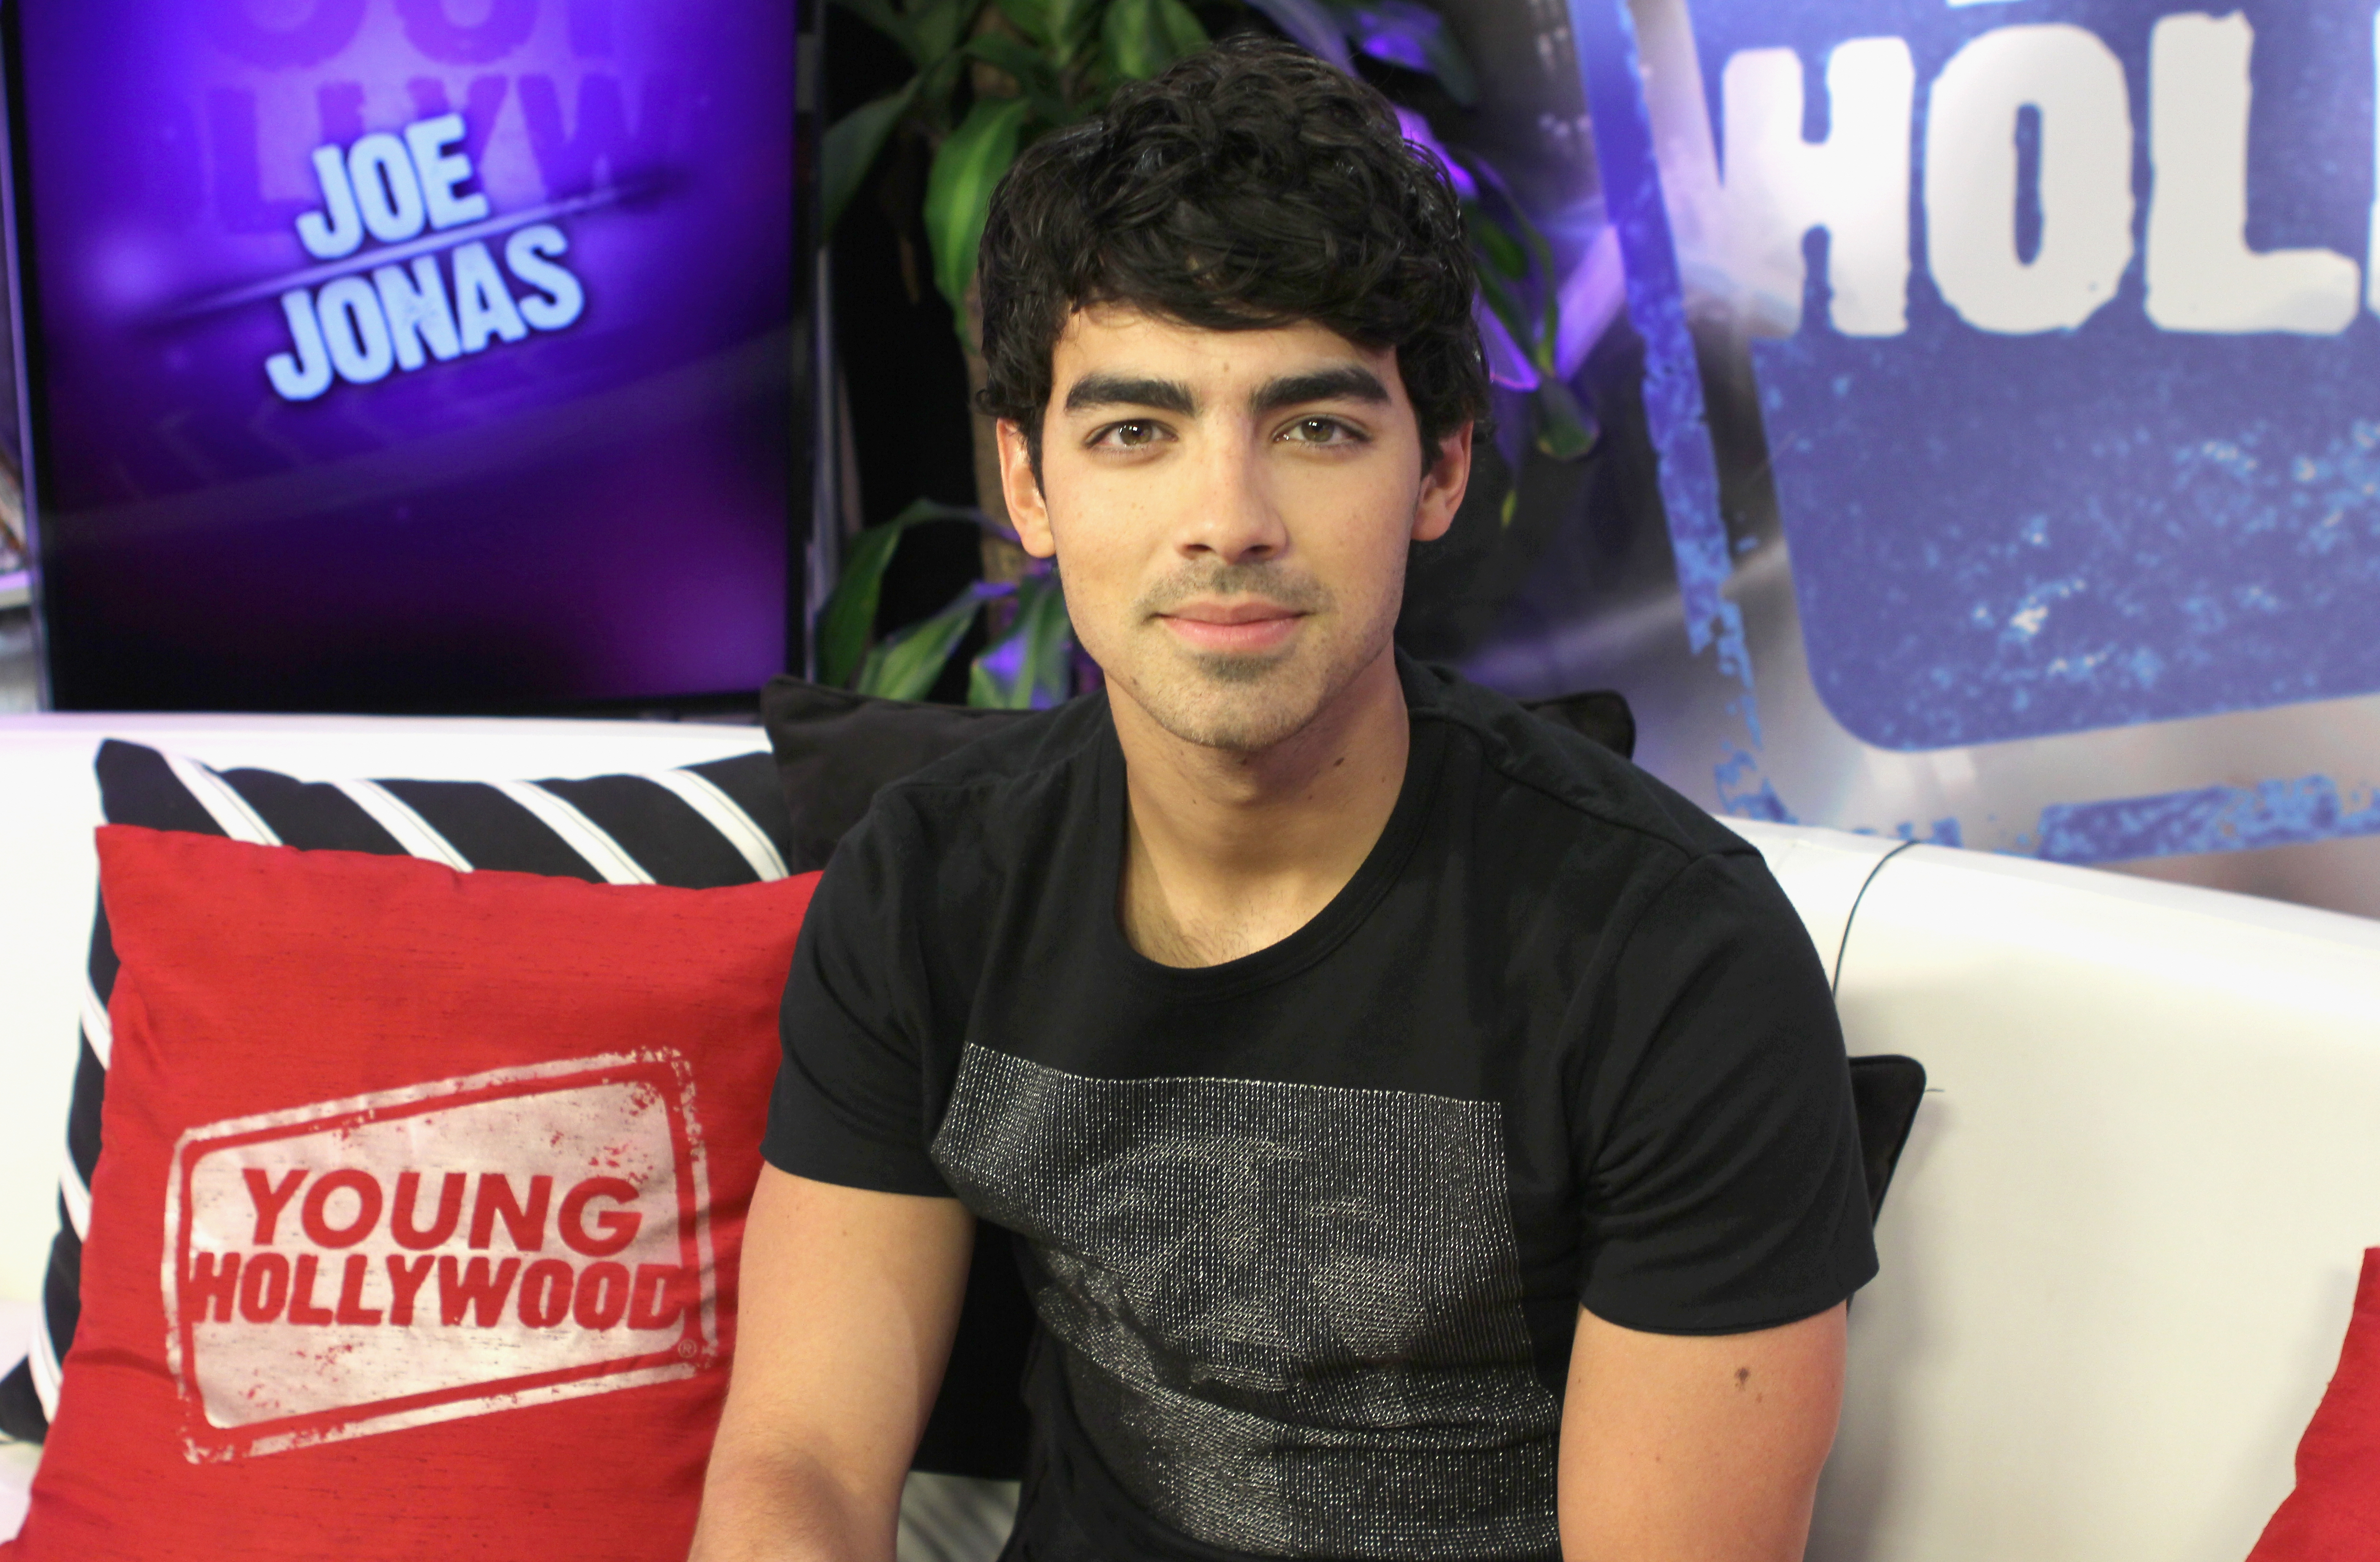 Joe Jonas visits the Young Hollywood Studio, on August 14, 2012, in Los Angeles, California. | Source: Getty Images